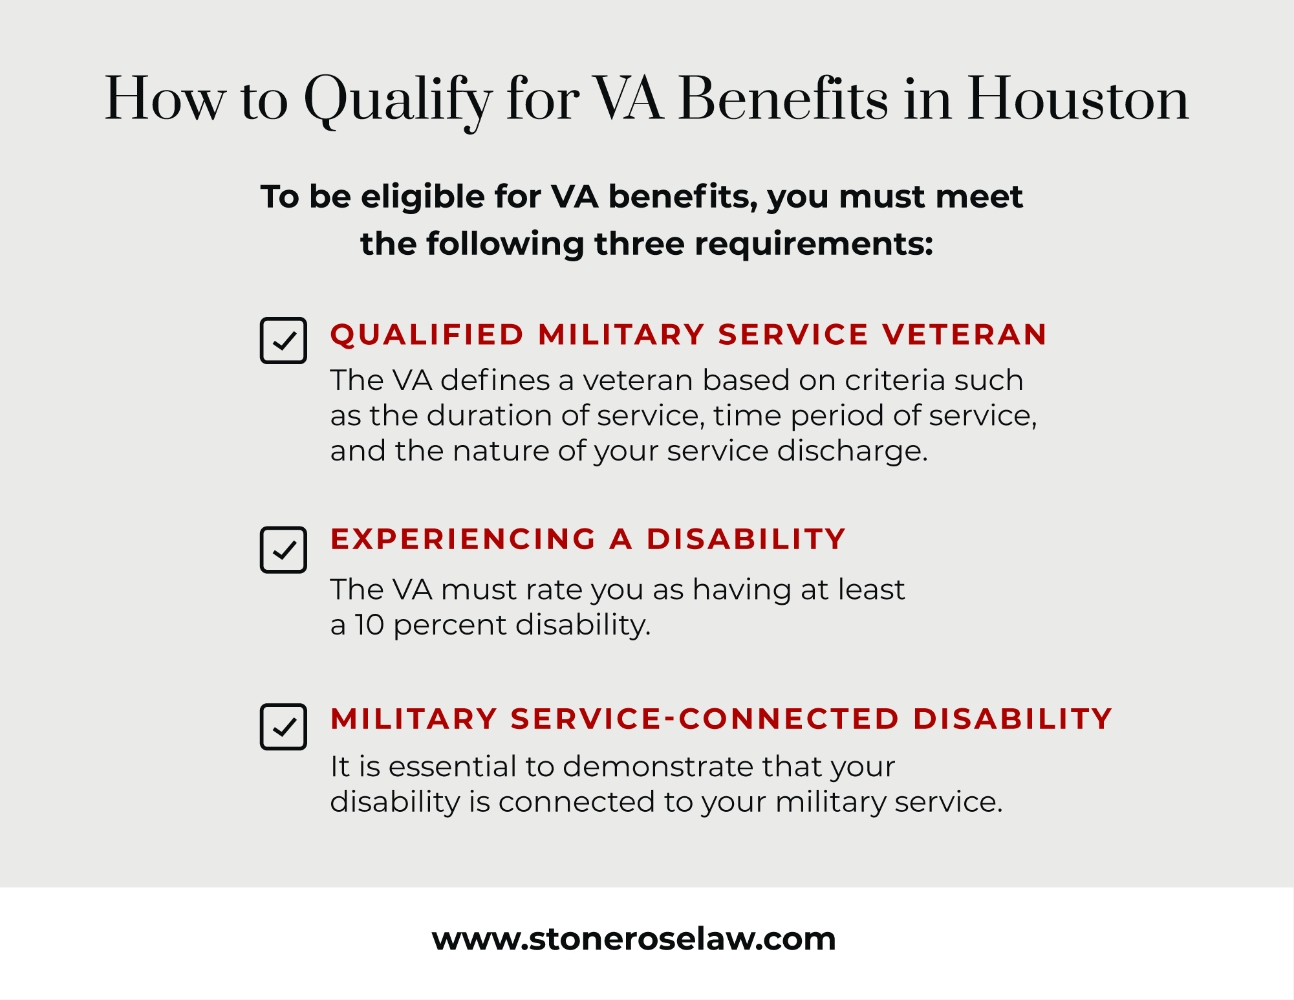 How to qualify for VA benefits in Houston